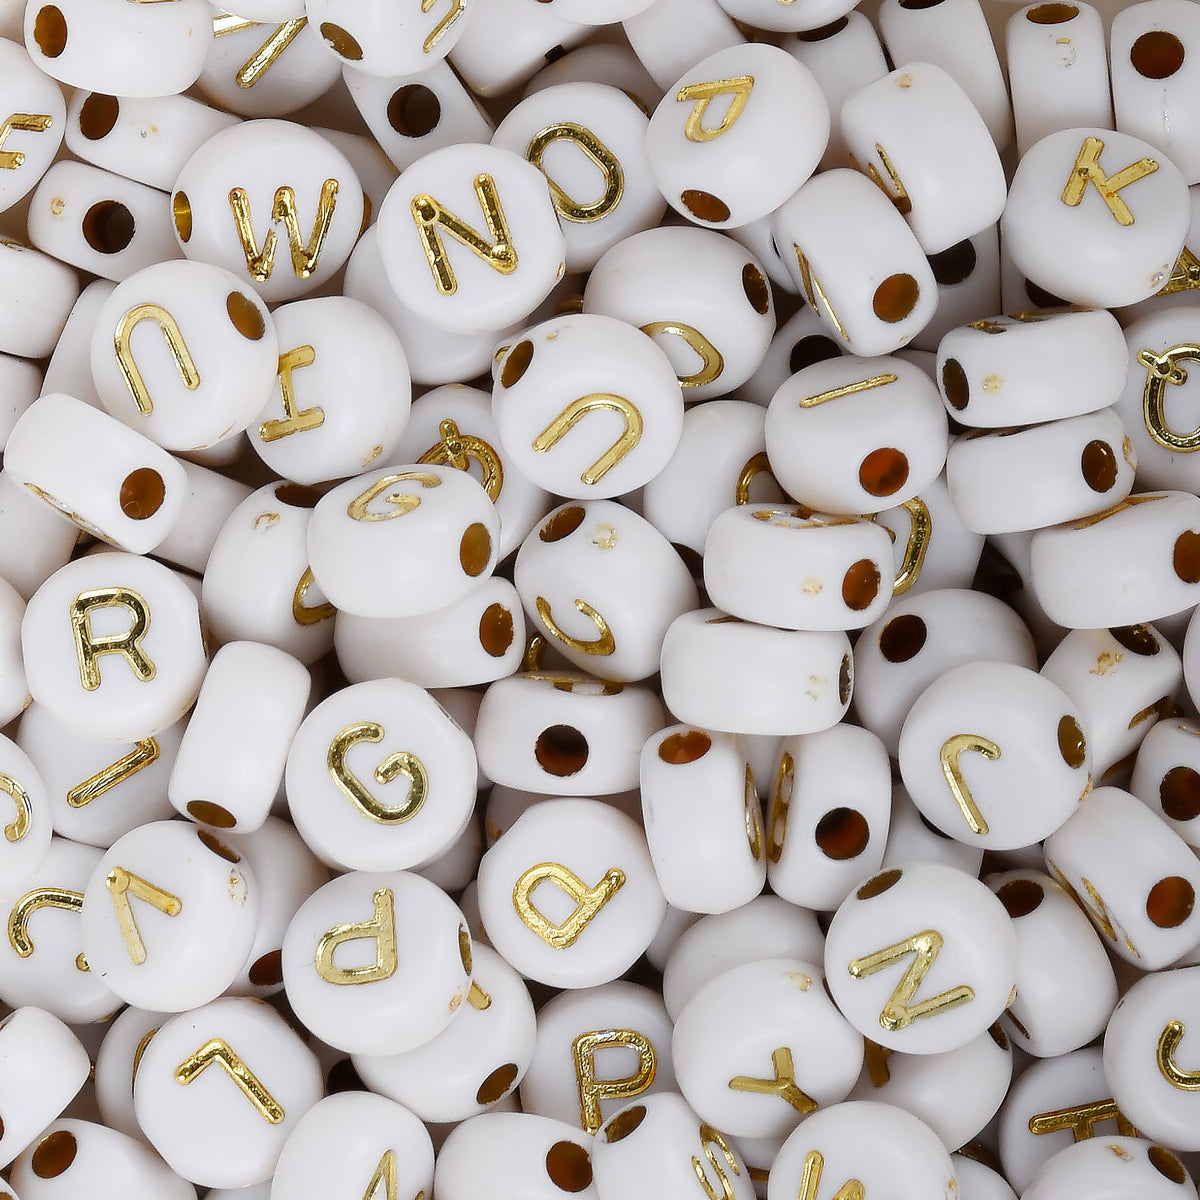 600 White Acrylic Letter Alphabet Beads with Silver Letters 7mm